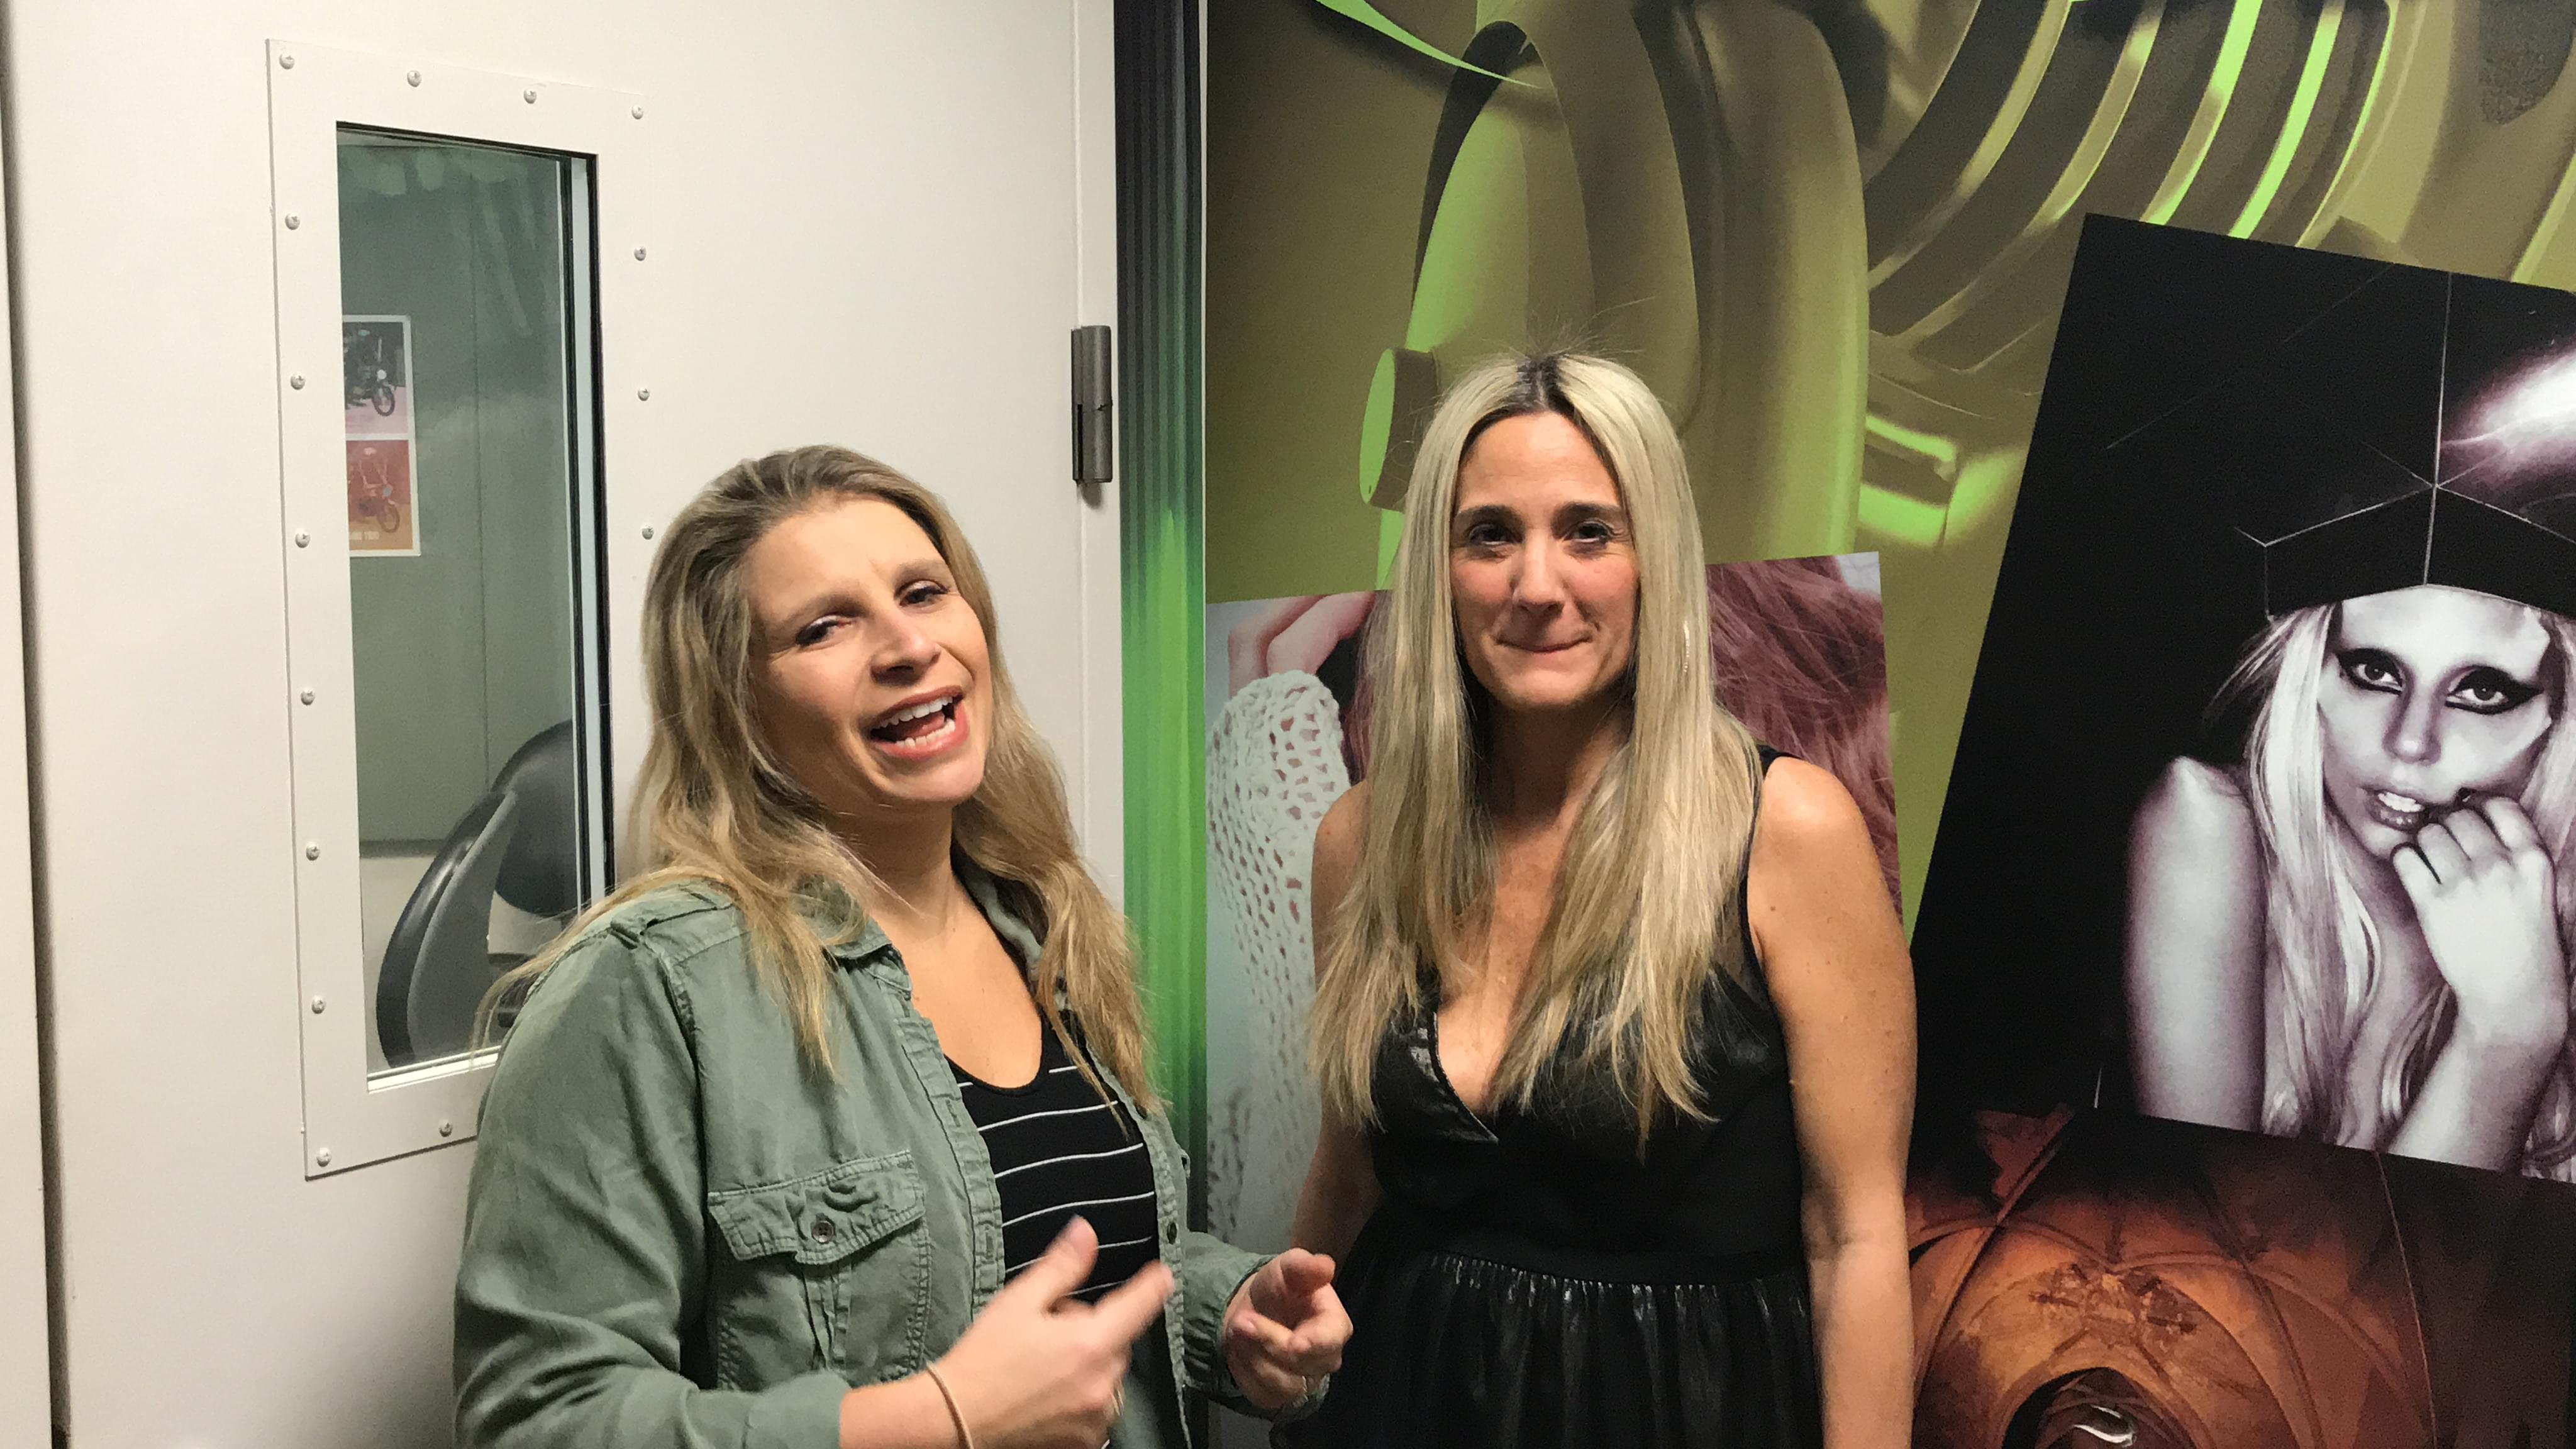 60 Seconds Behind the Scenes- Karenna Alexander gives us plans for Galentine’s Day